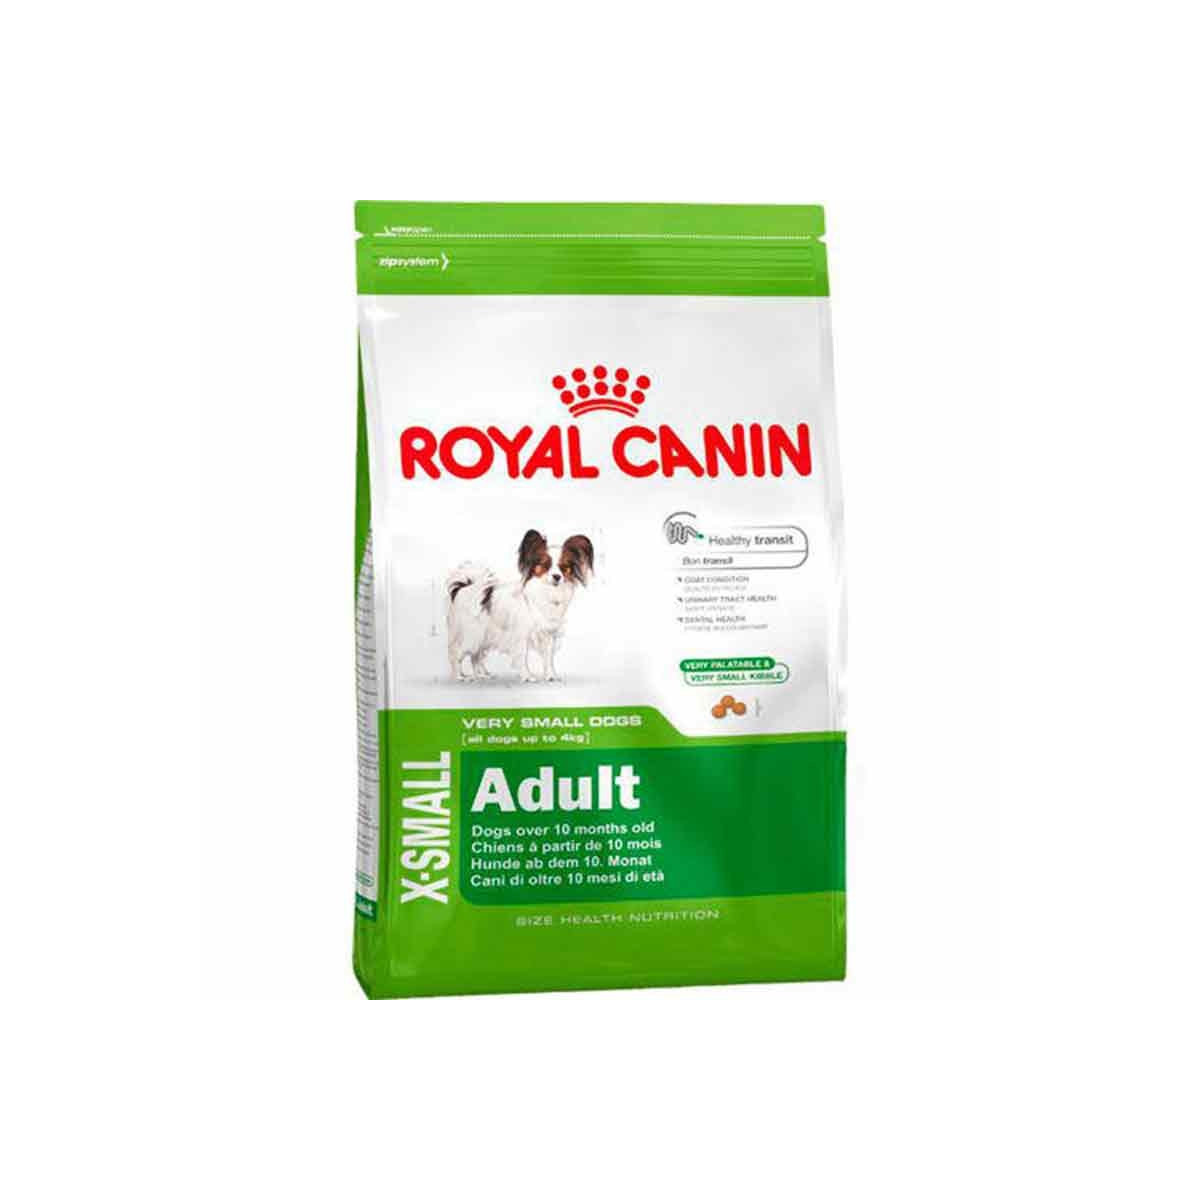 Royal Canin X-small adult